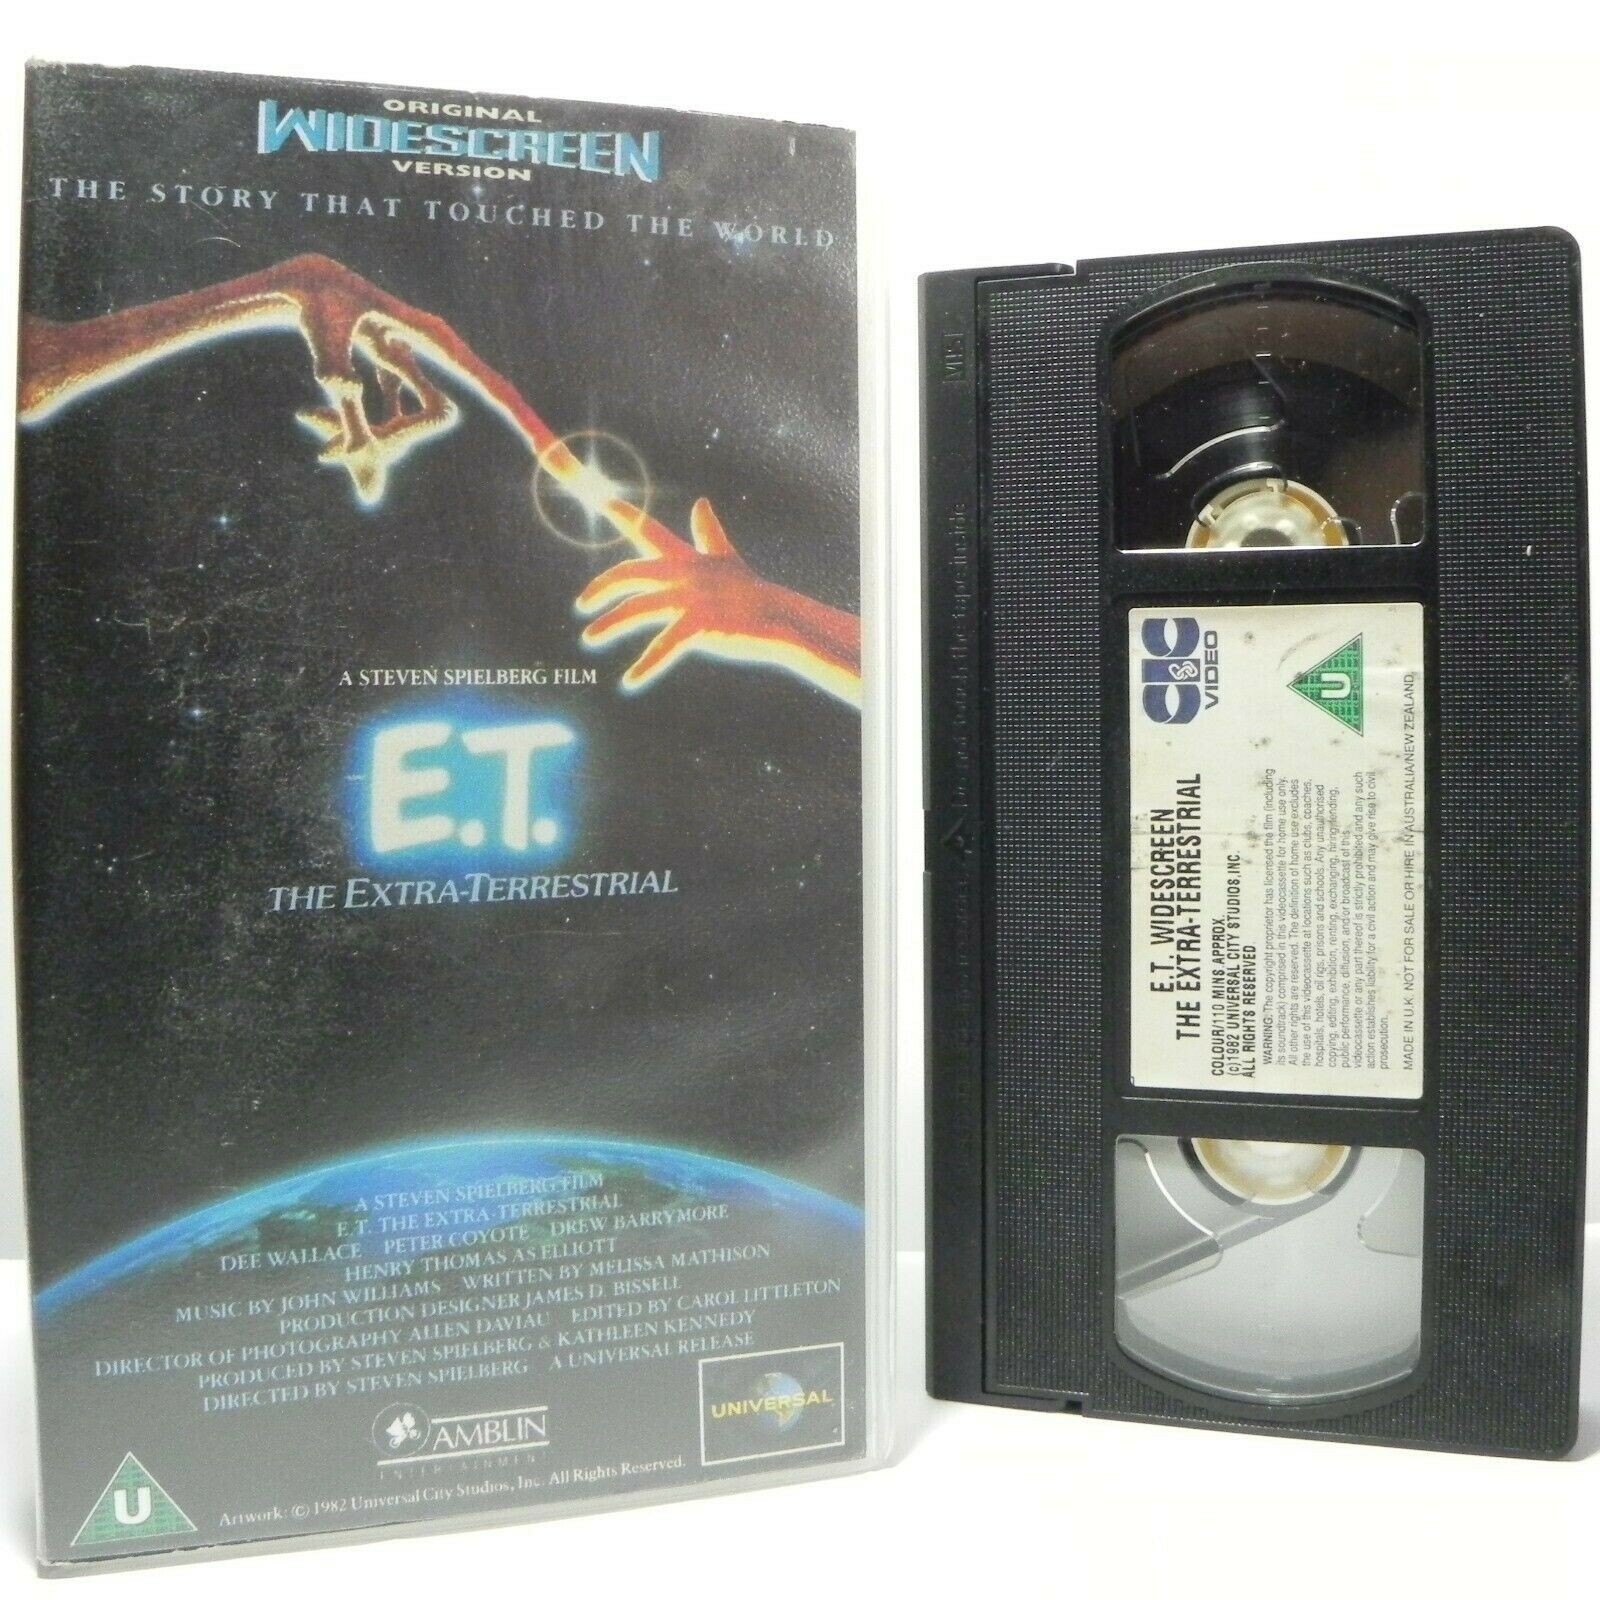 E.T.: The Extra-Terrestial: By S.Spielberg - Classic Film - Widescreen - VHS-